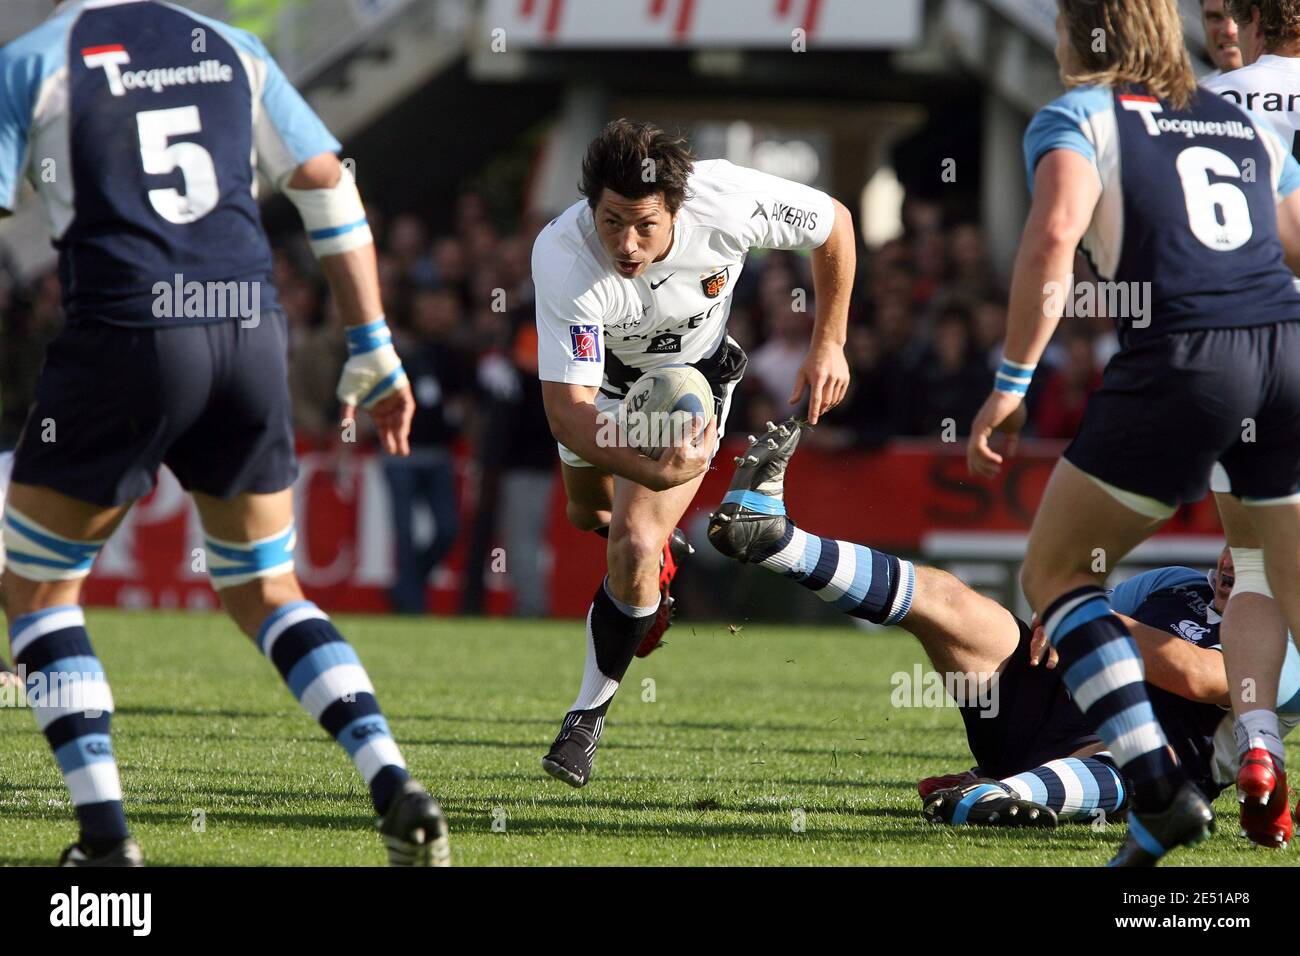 Toulouse's Byron Kelleher during the French Top 14 Rugby match, Stade  Toulousain vs Castres Olympique at the Pierre Antoine stadium in Castres,  France on May 7, 2008. Toulouse won 16-6. Photo by